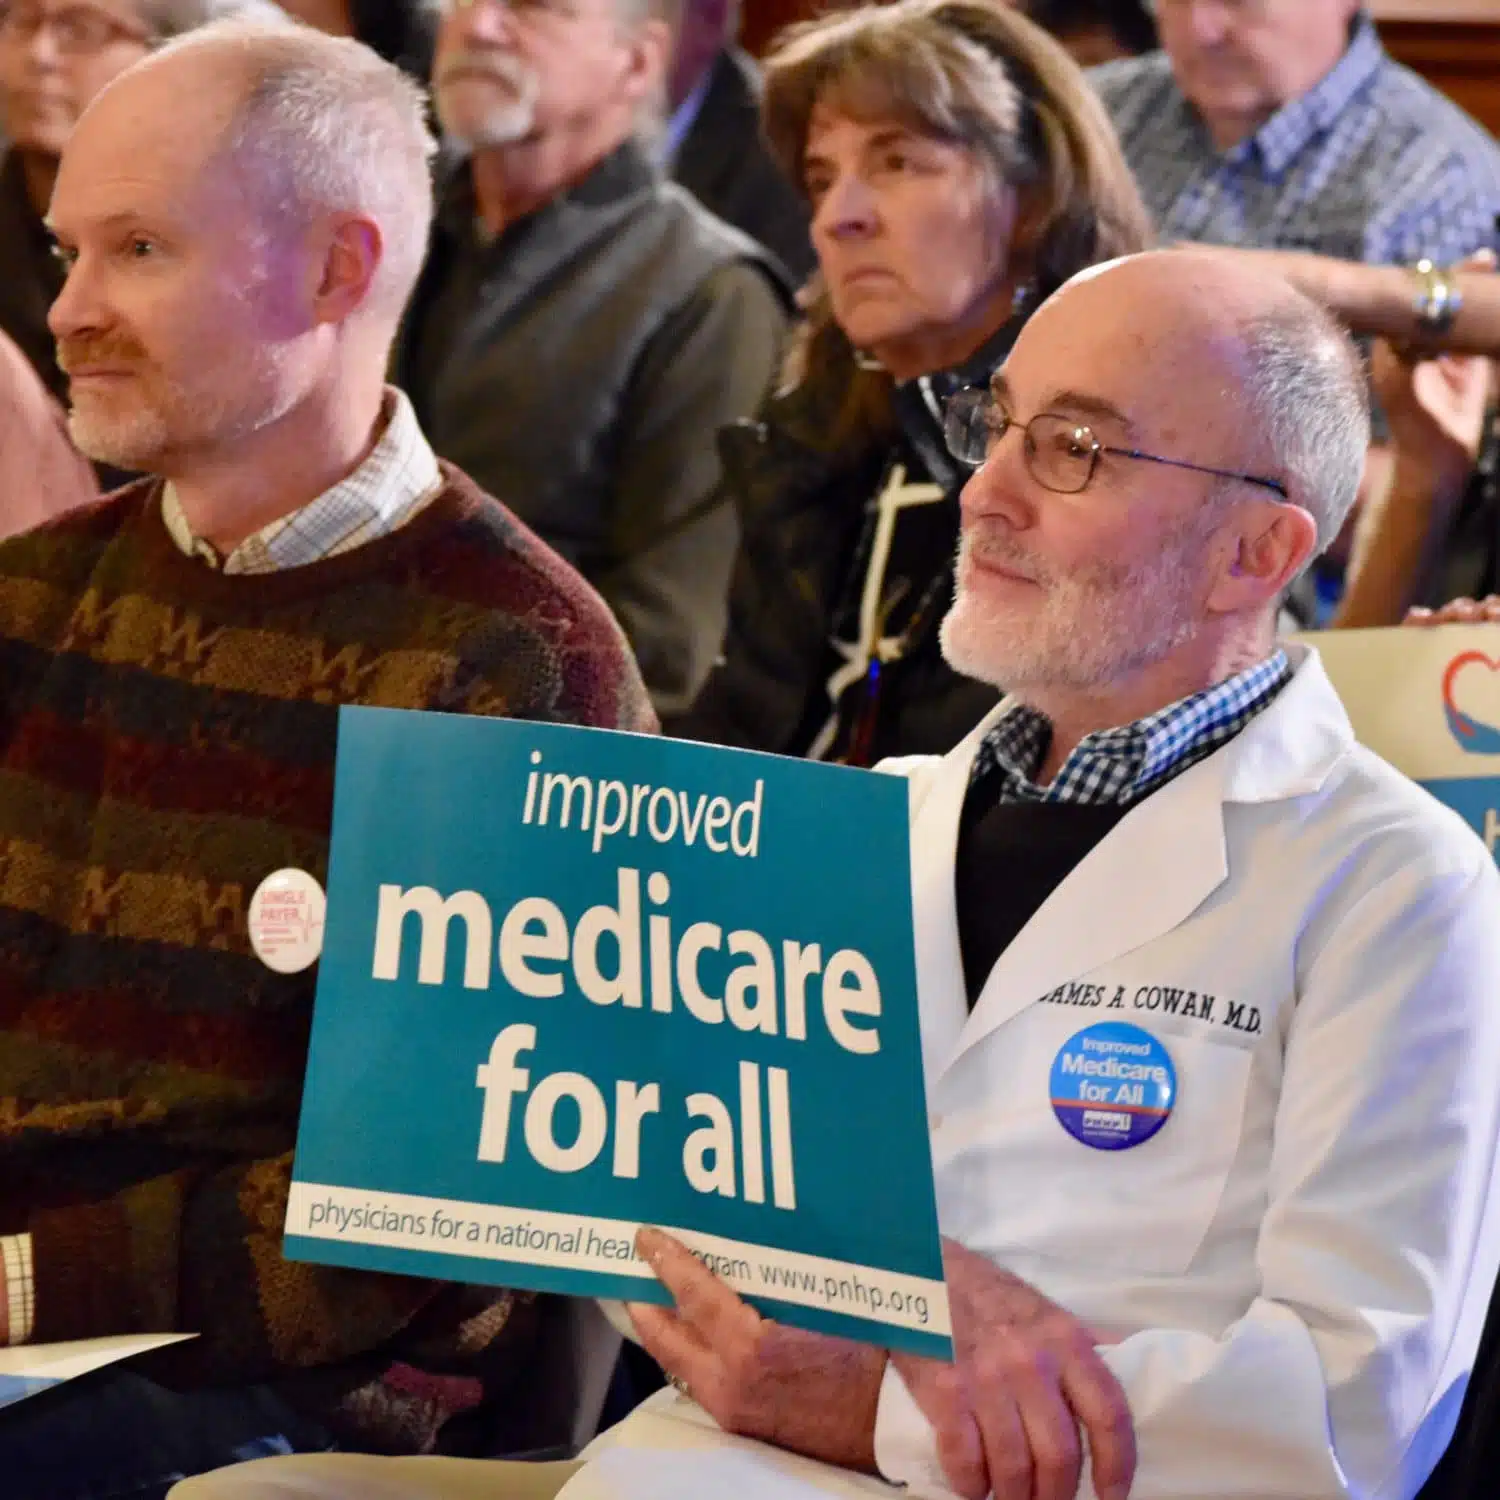 Support Rhode Island single payer